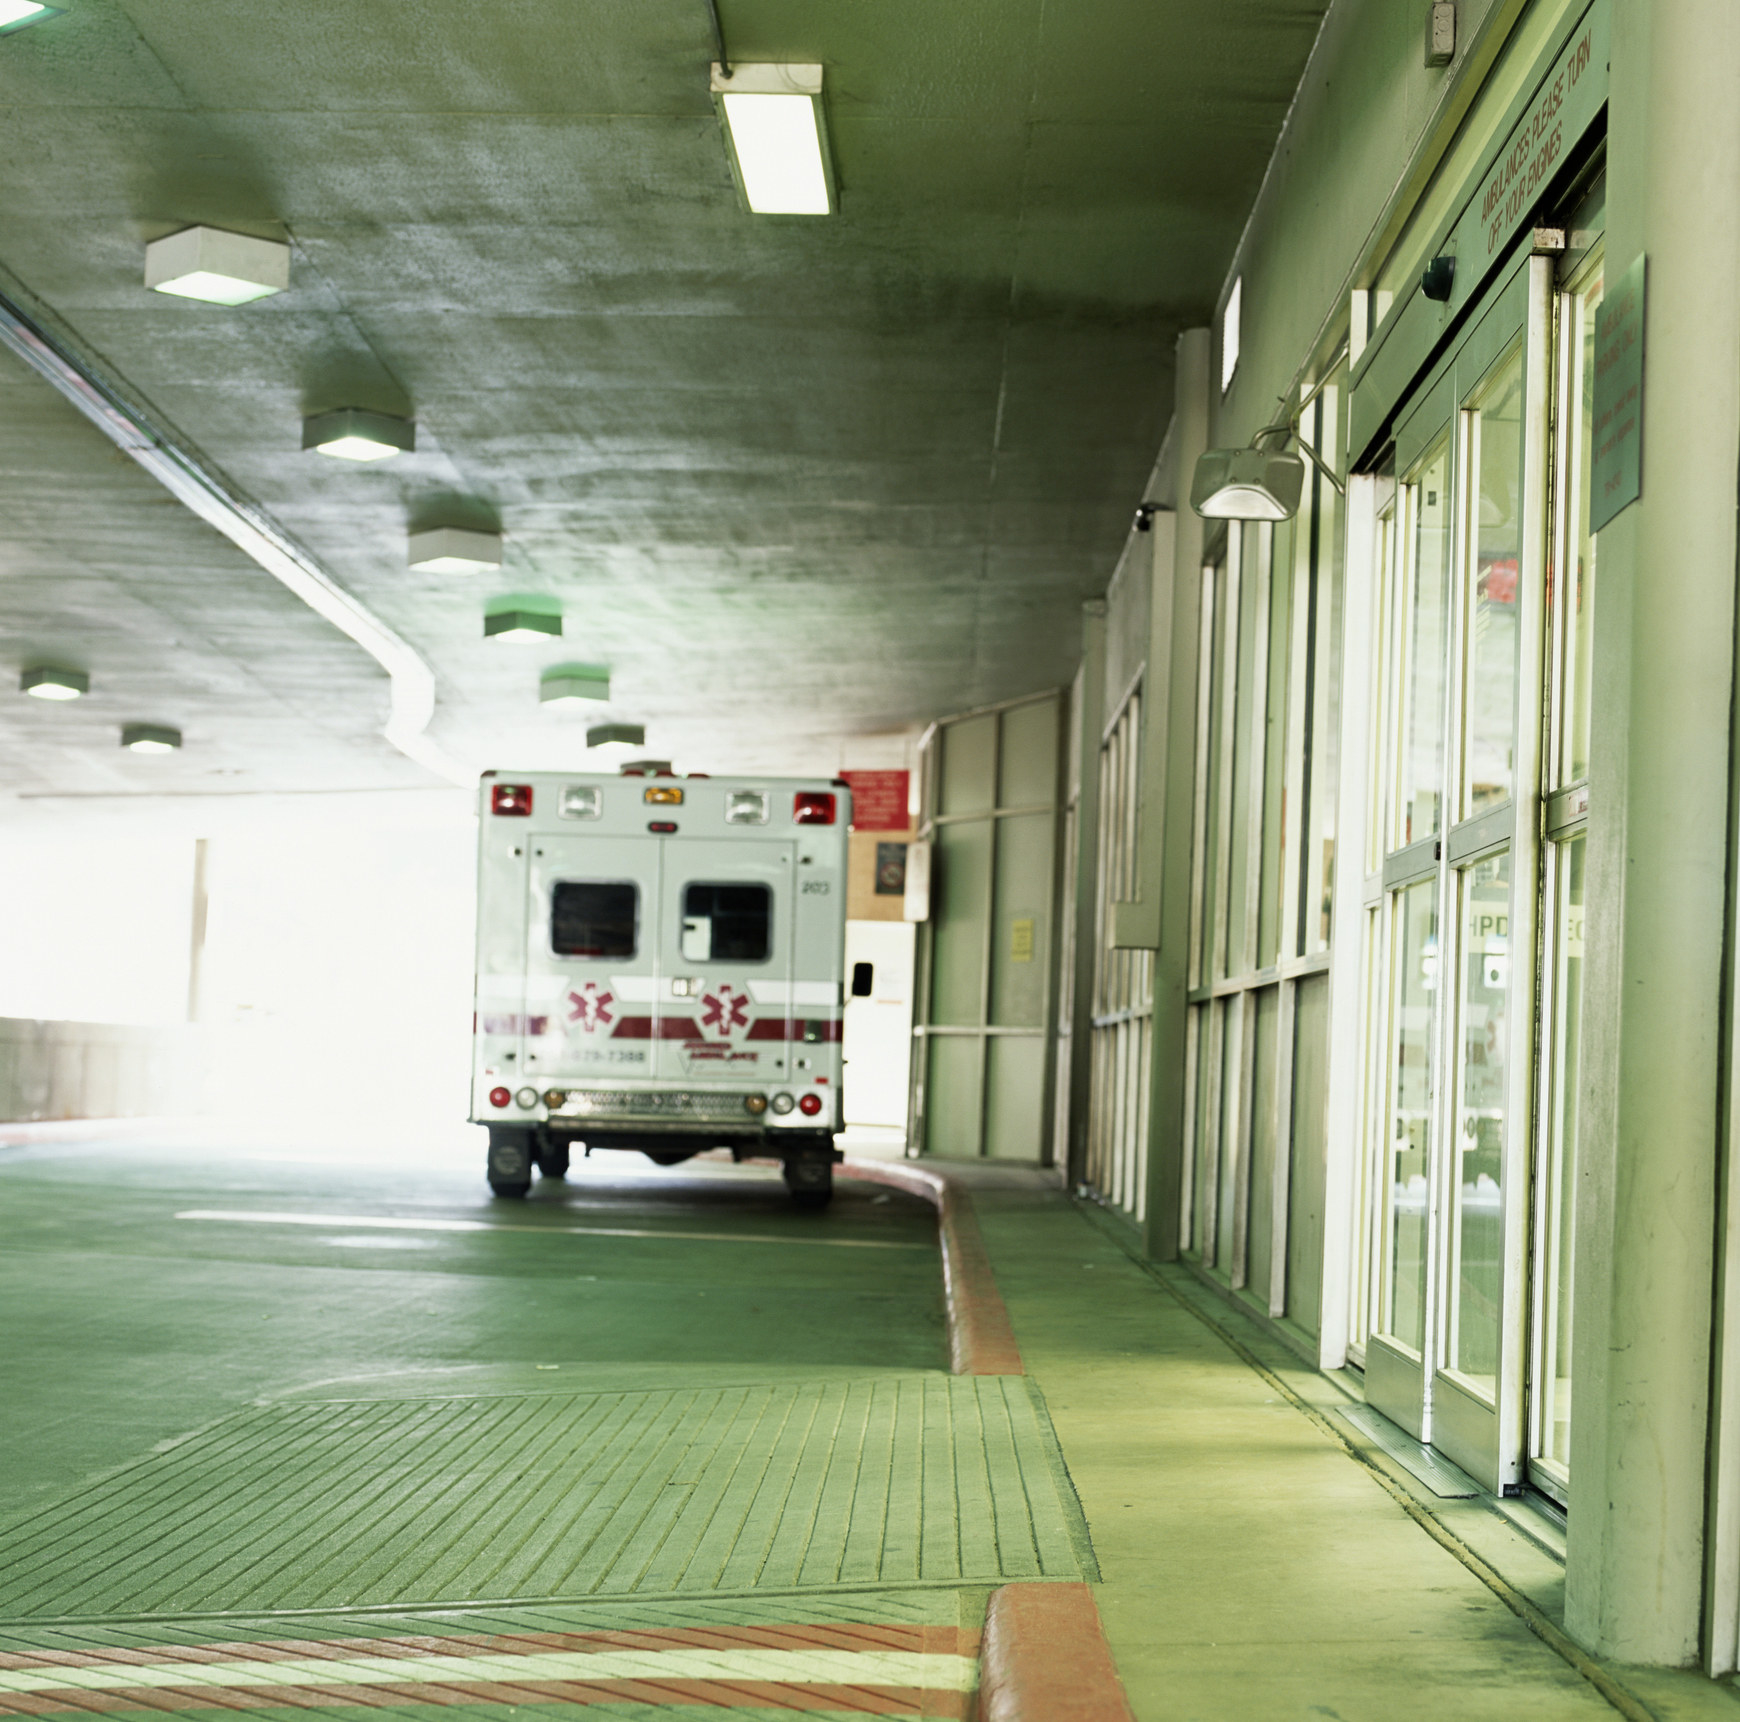 An ambulance truck parked in a hospital entryway